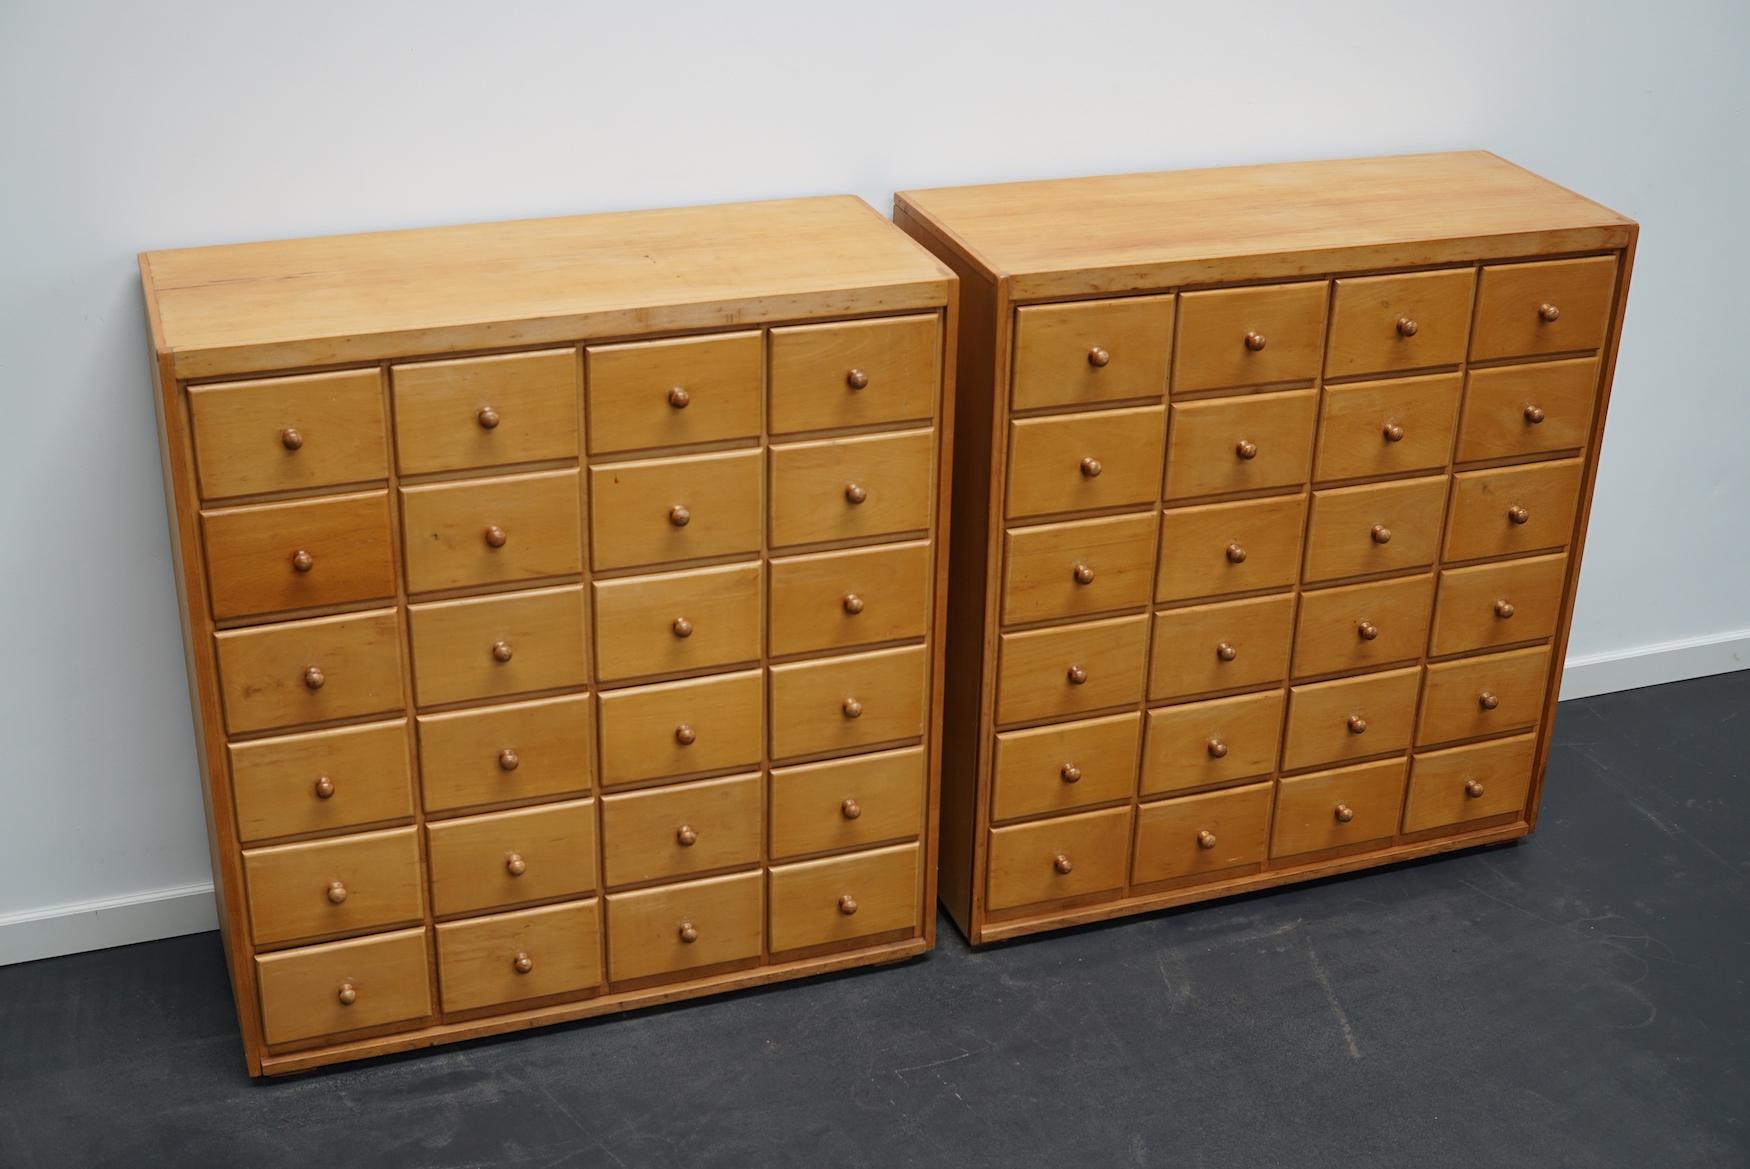 This pair of apothecary cabinets were made circa 1950/60s in the Netherlands. They feature 24 drawers in solid beech with wooden knobs. The interior dimensions of the drawers are: D W H 30 x 15.5 x 11 cm. The cabinets are sold individually.